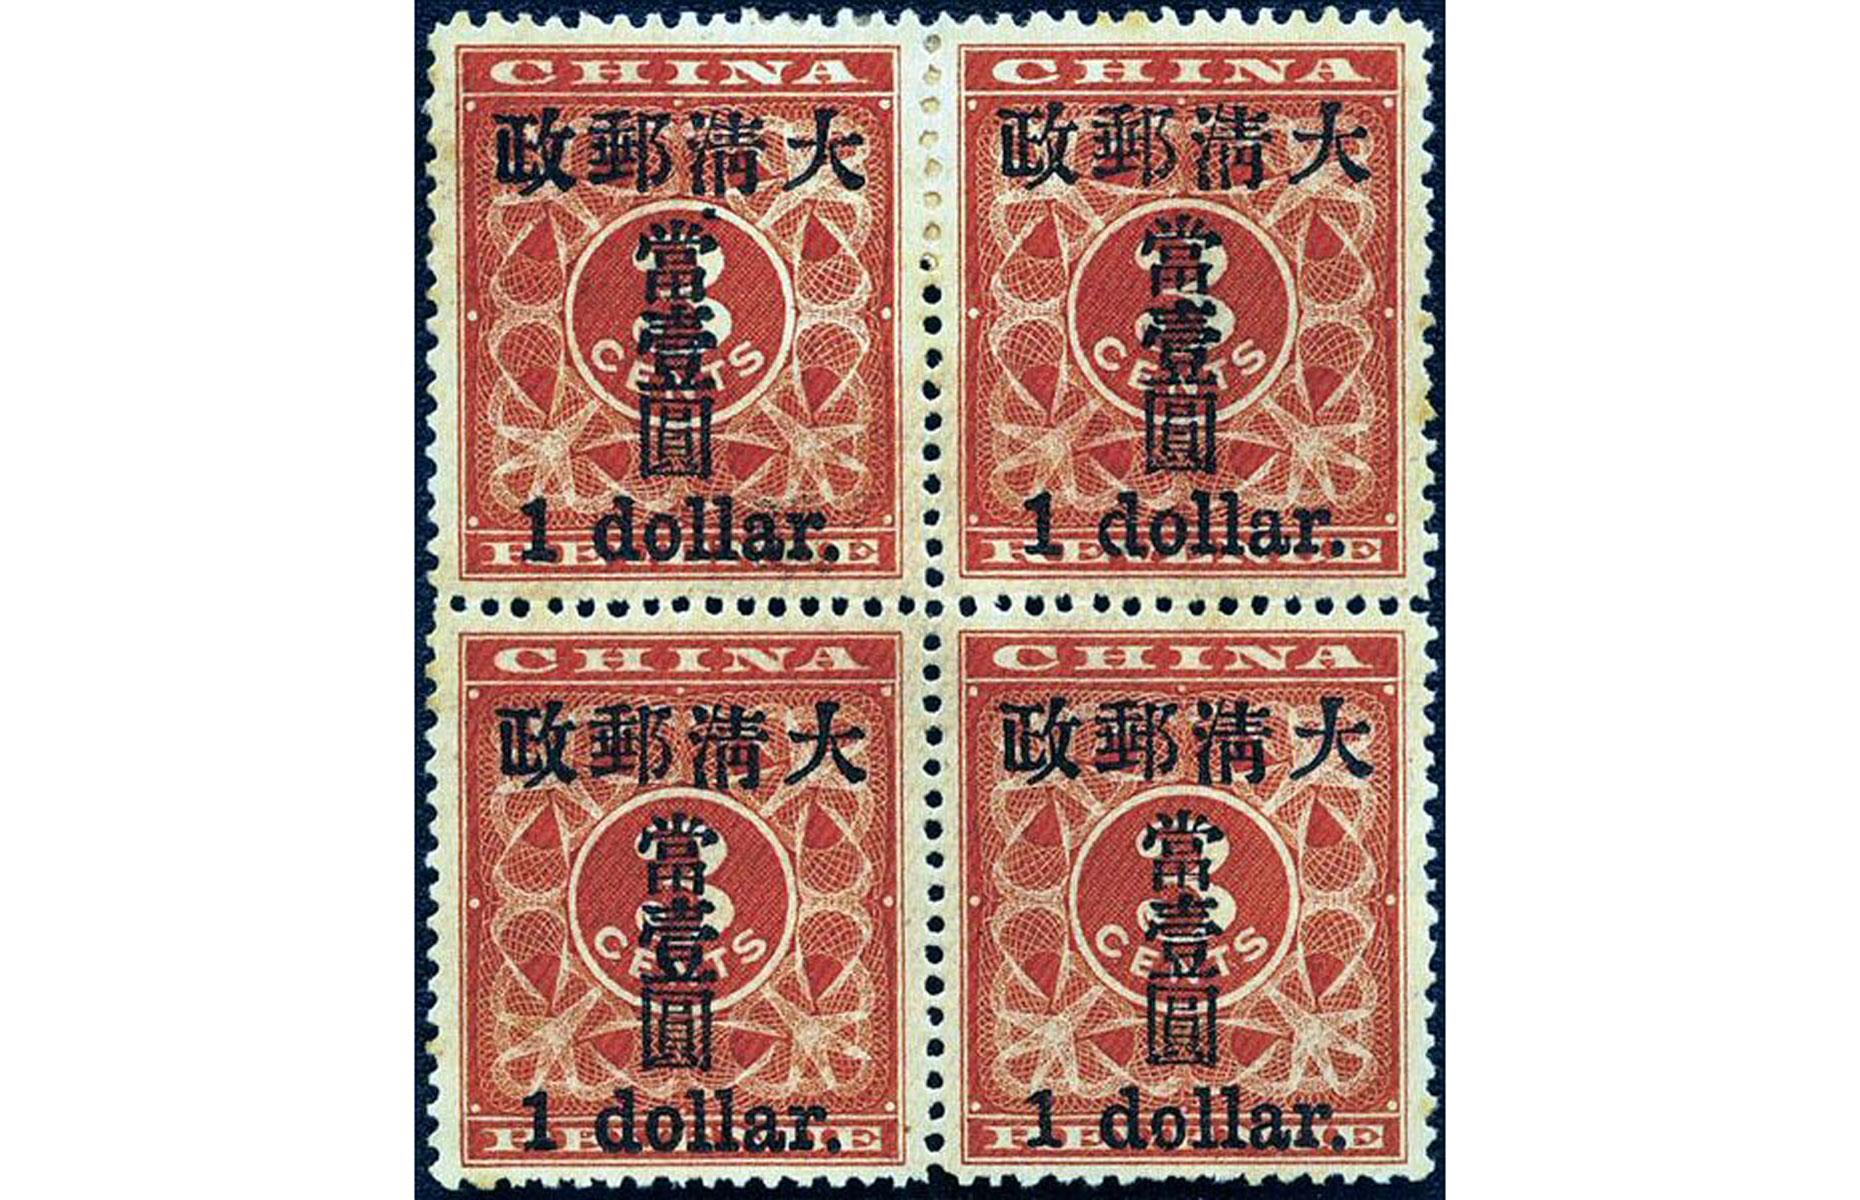 China 1897 Small One Dollar Red Revenues – $4.6 million (£3.9m) each 